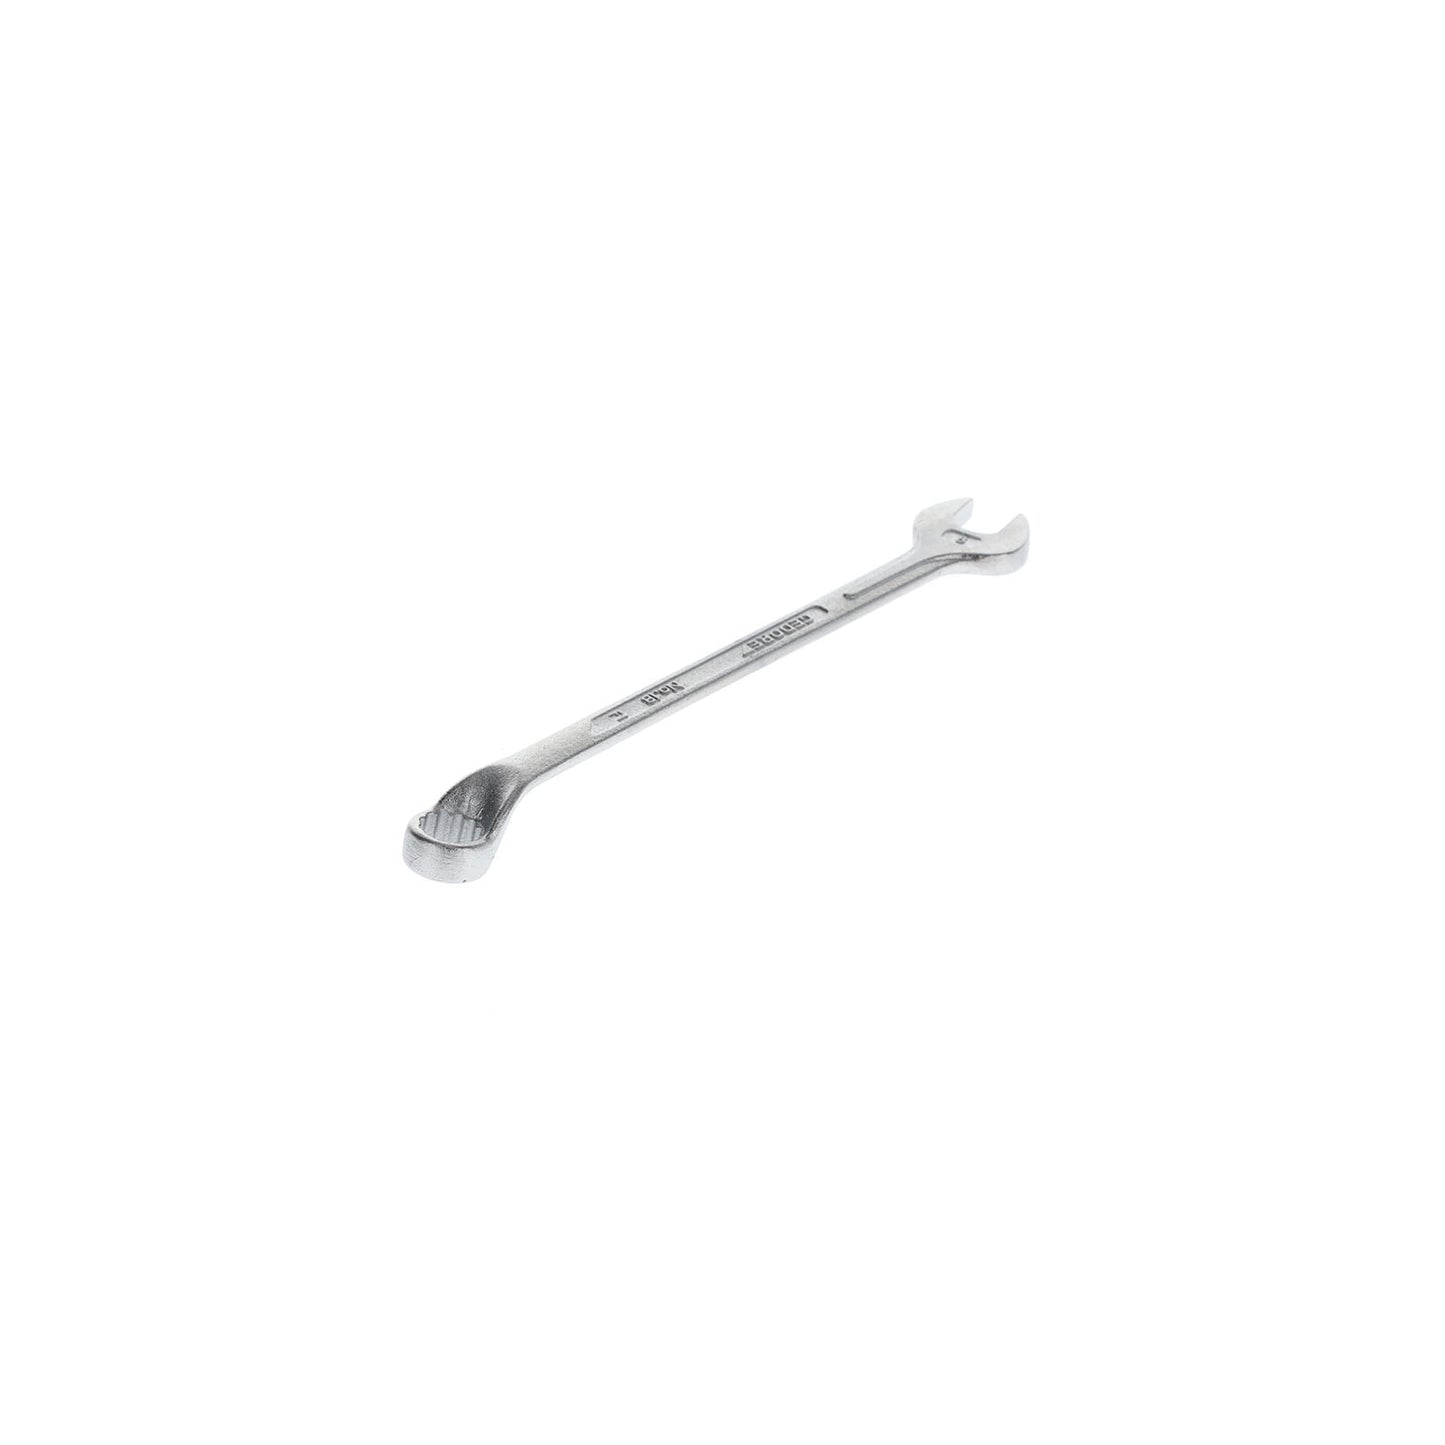 GEDORE 1 B 8 - Offset Combination Wrench, 8mm (6000670)